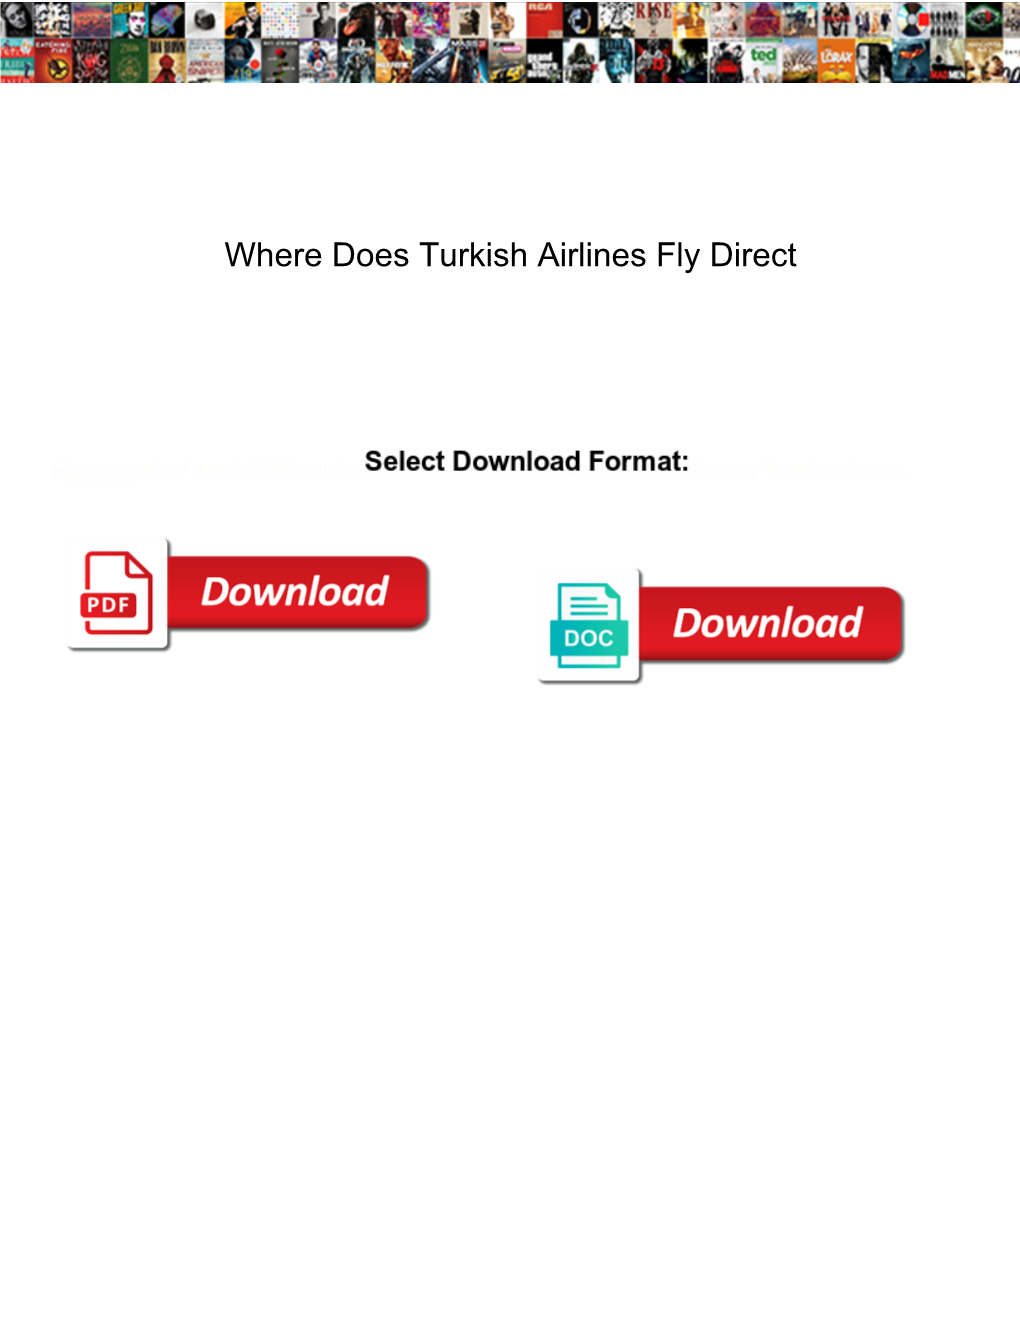 Where Does Turkish Airlines Fly Direct